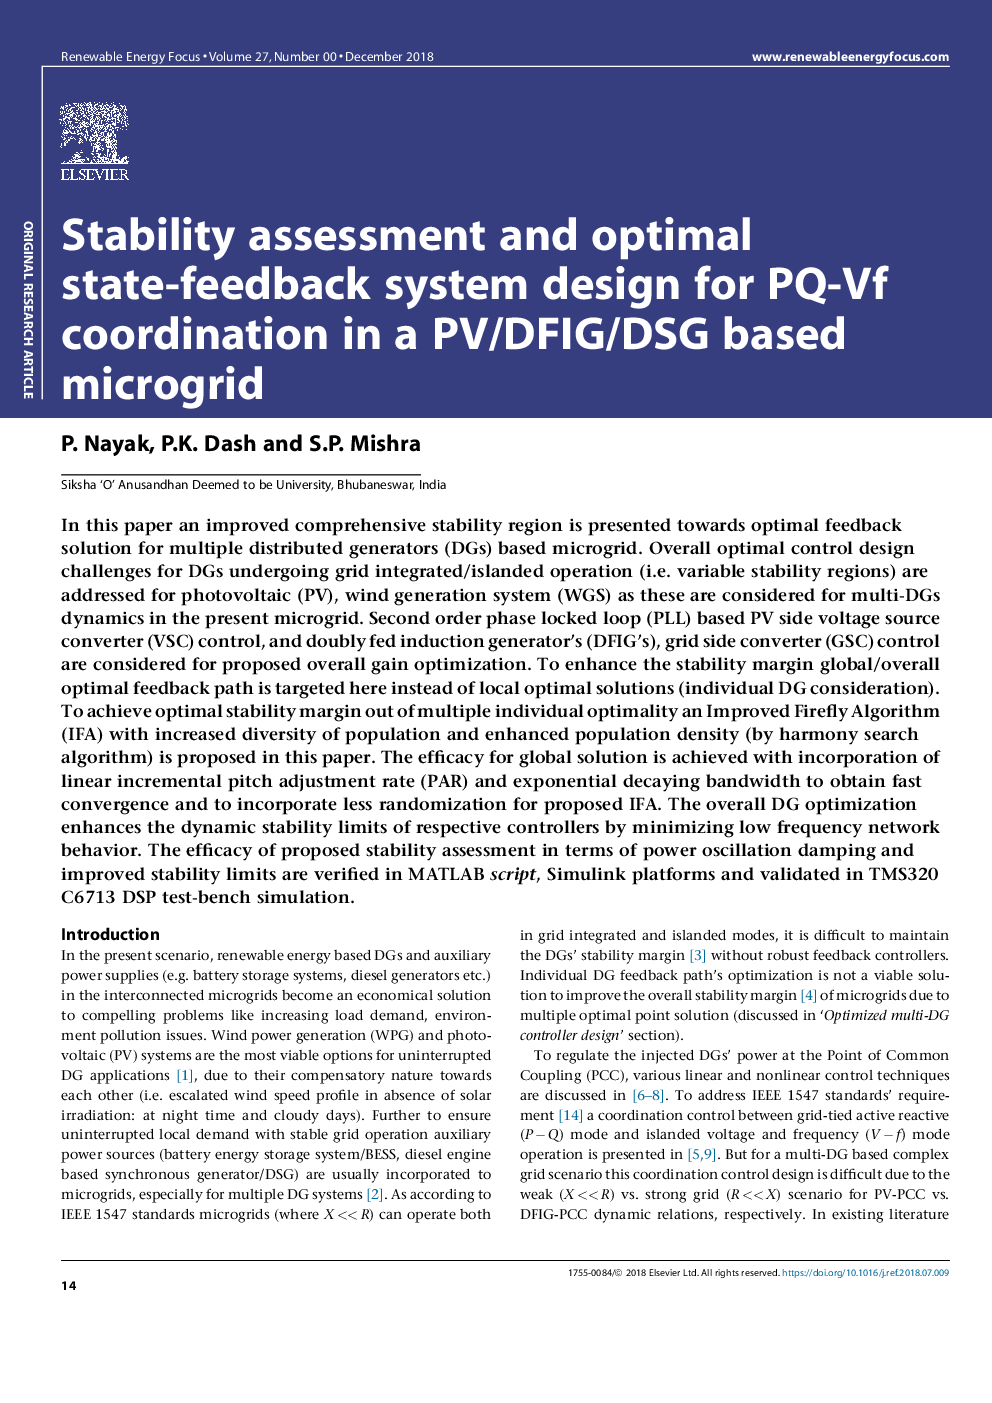 Stability assessment and optimal state-feedback system design for PQ-Vf coordination in a PV/DFIG/DSG based microgrid